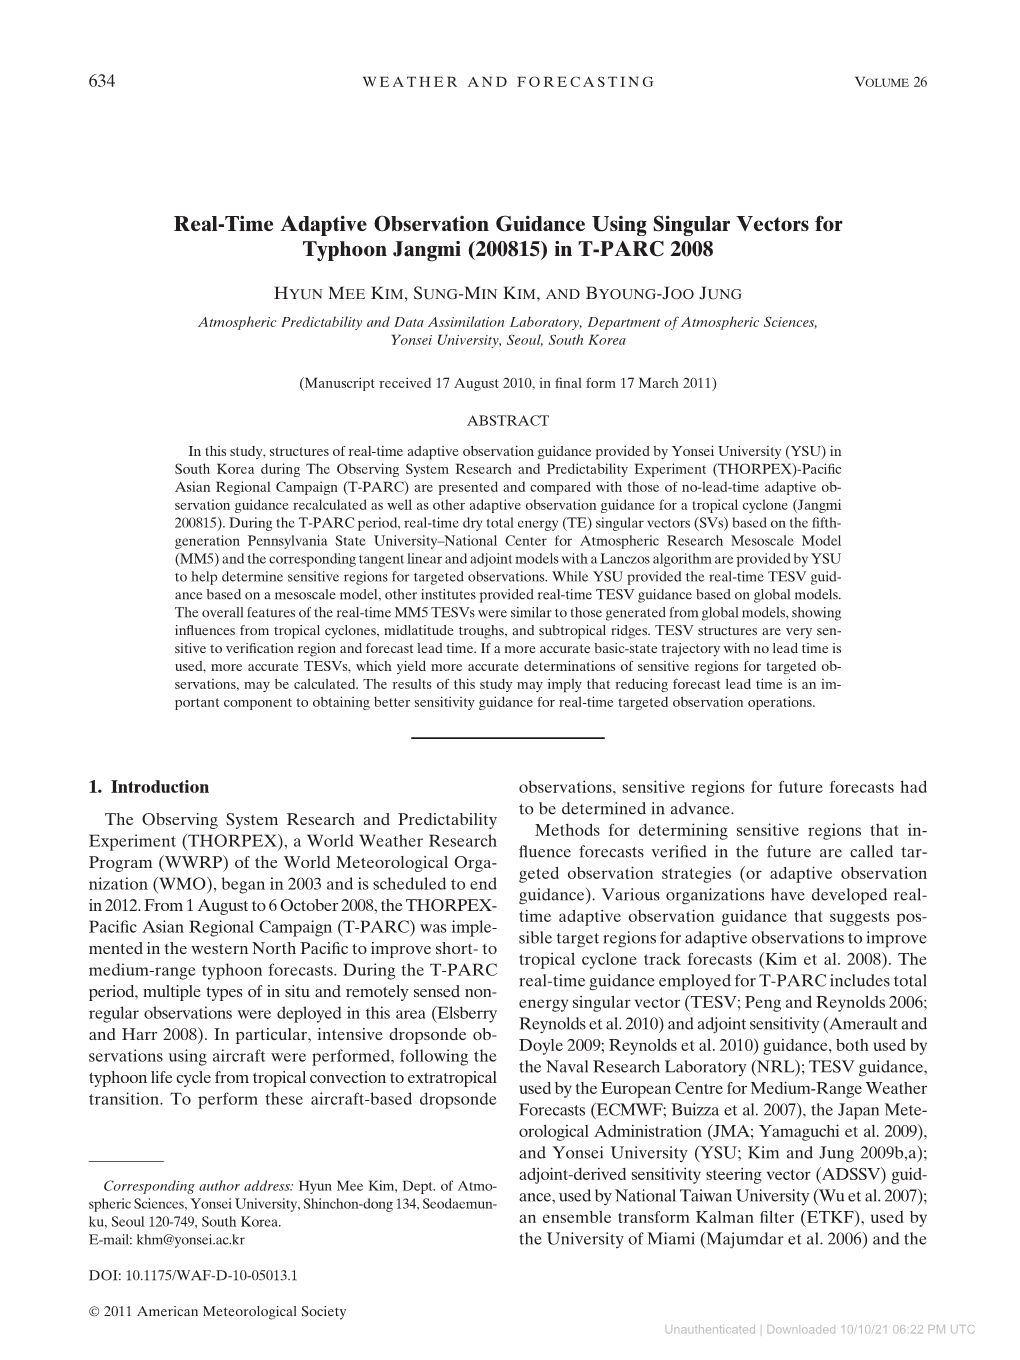 Real-Time Adaptive Observation Guidance Using Singular Vectors for Typhoon Jangmi (200815) in T-PARC 2008